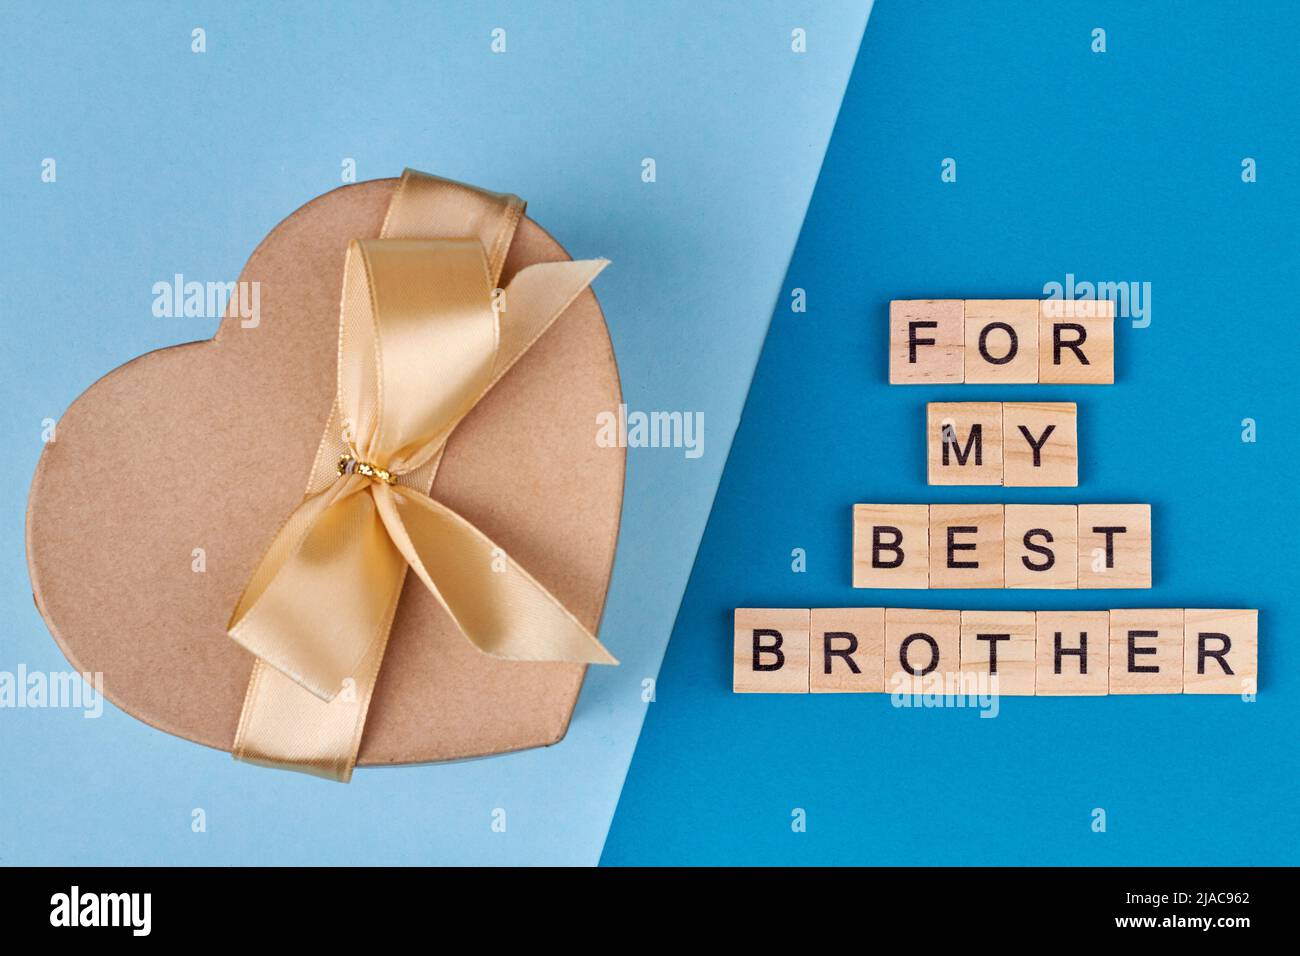 Gift gift box and wooden cubes with inscription For my best brother. Flat lay composition on blue background. Stock Photo